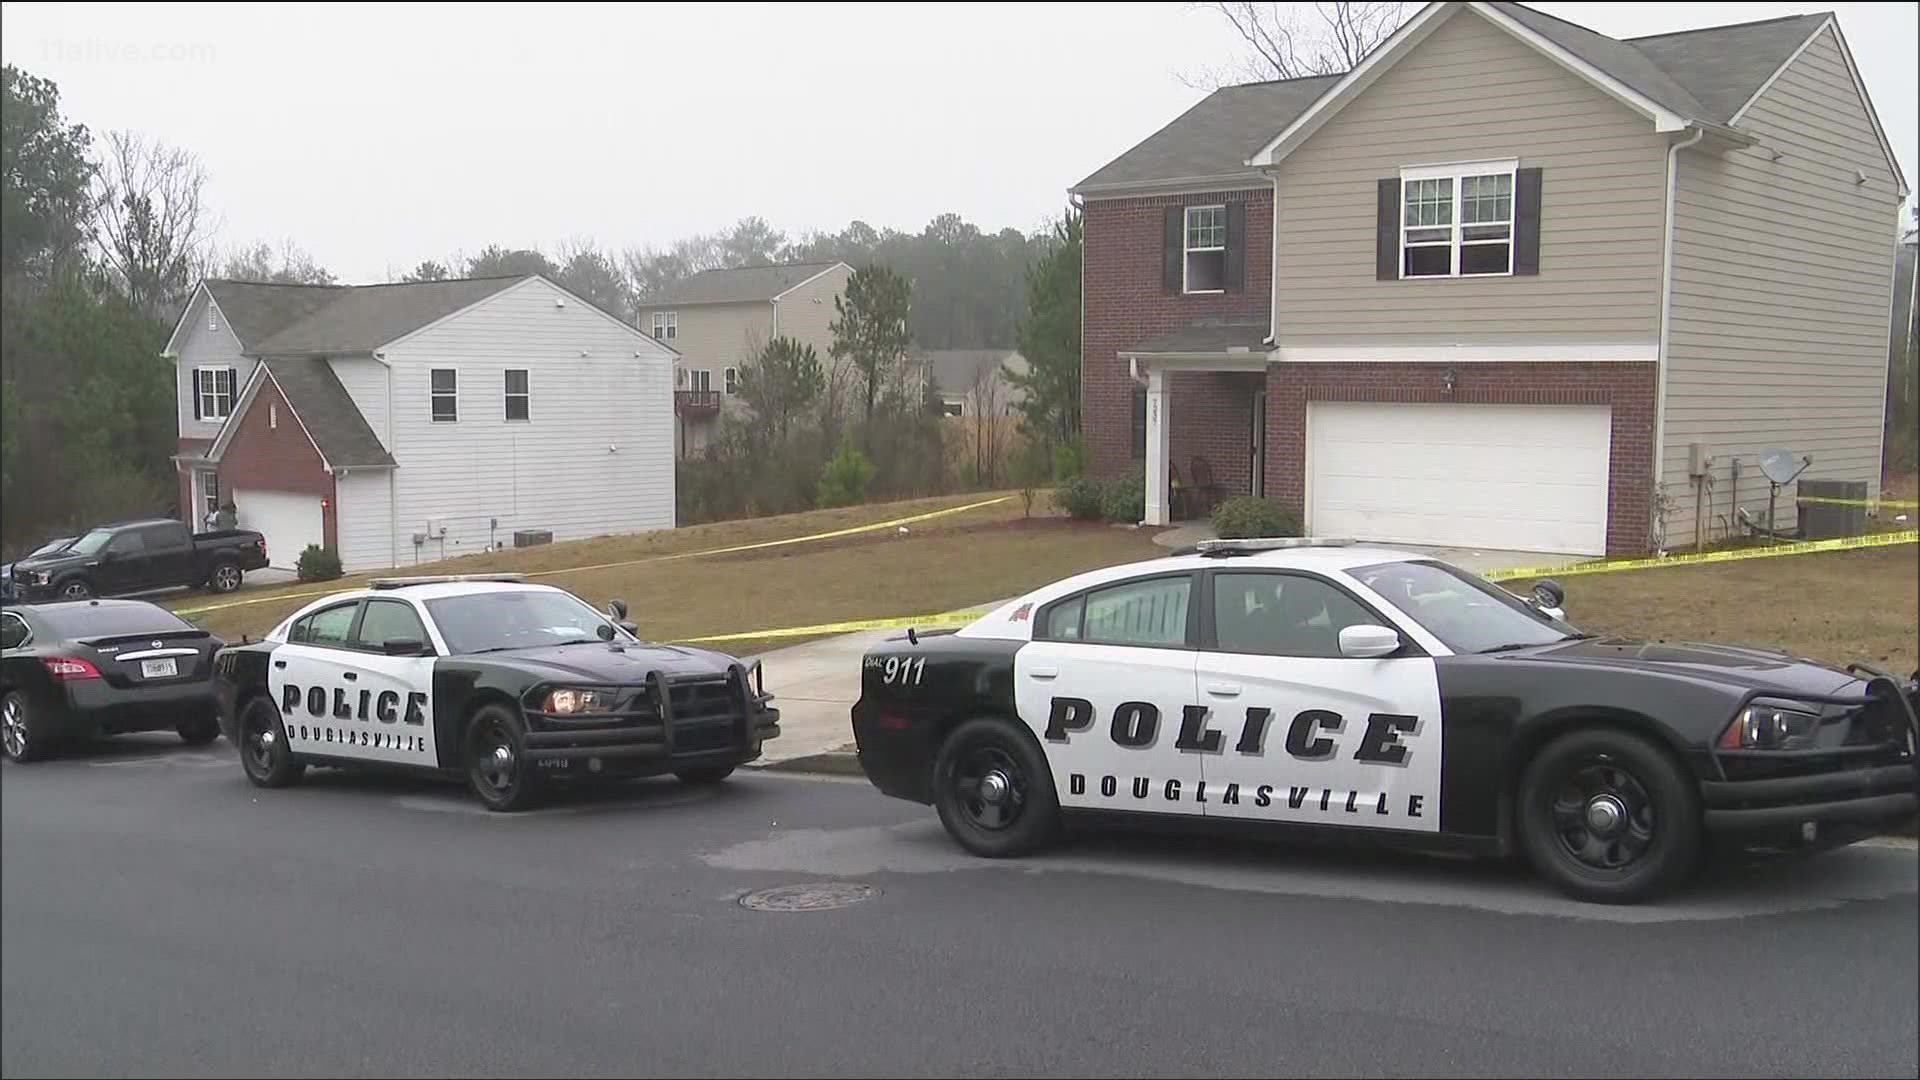 The Douglasville Police Department announced the arrests in a press conference that was posted to their Facebook page.